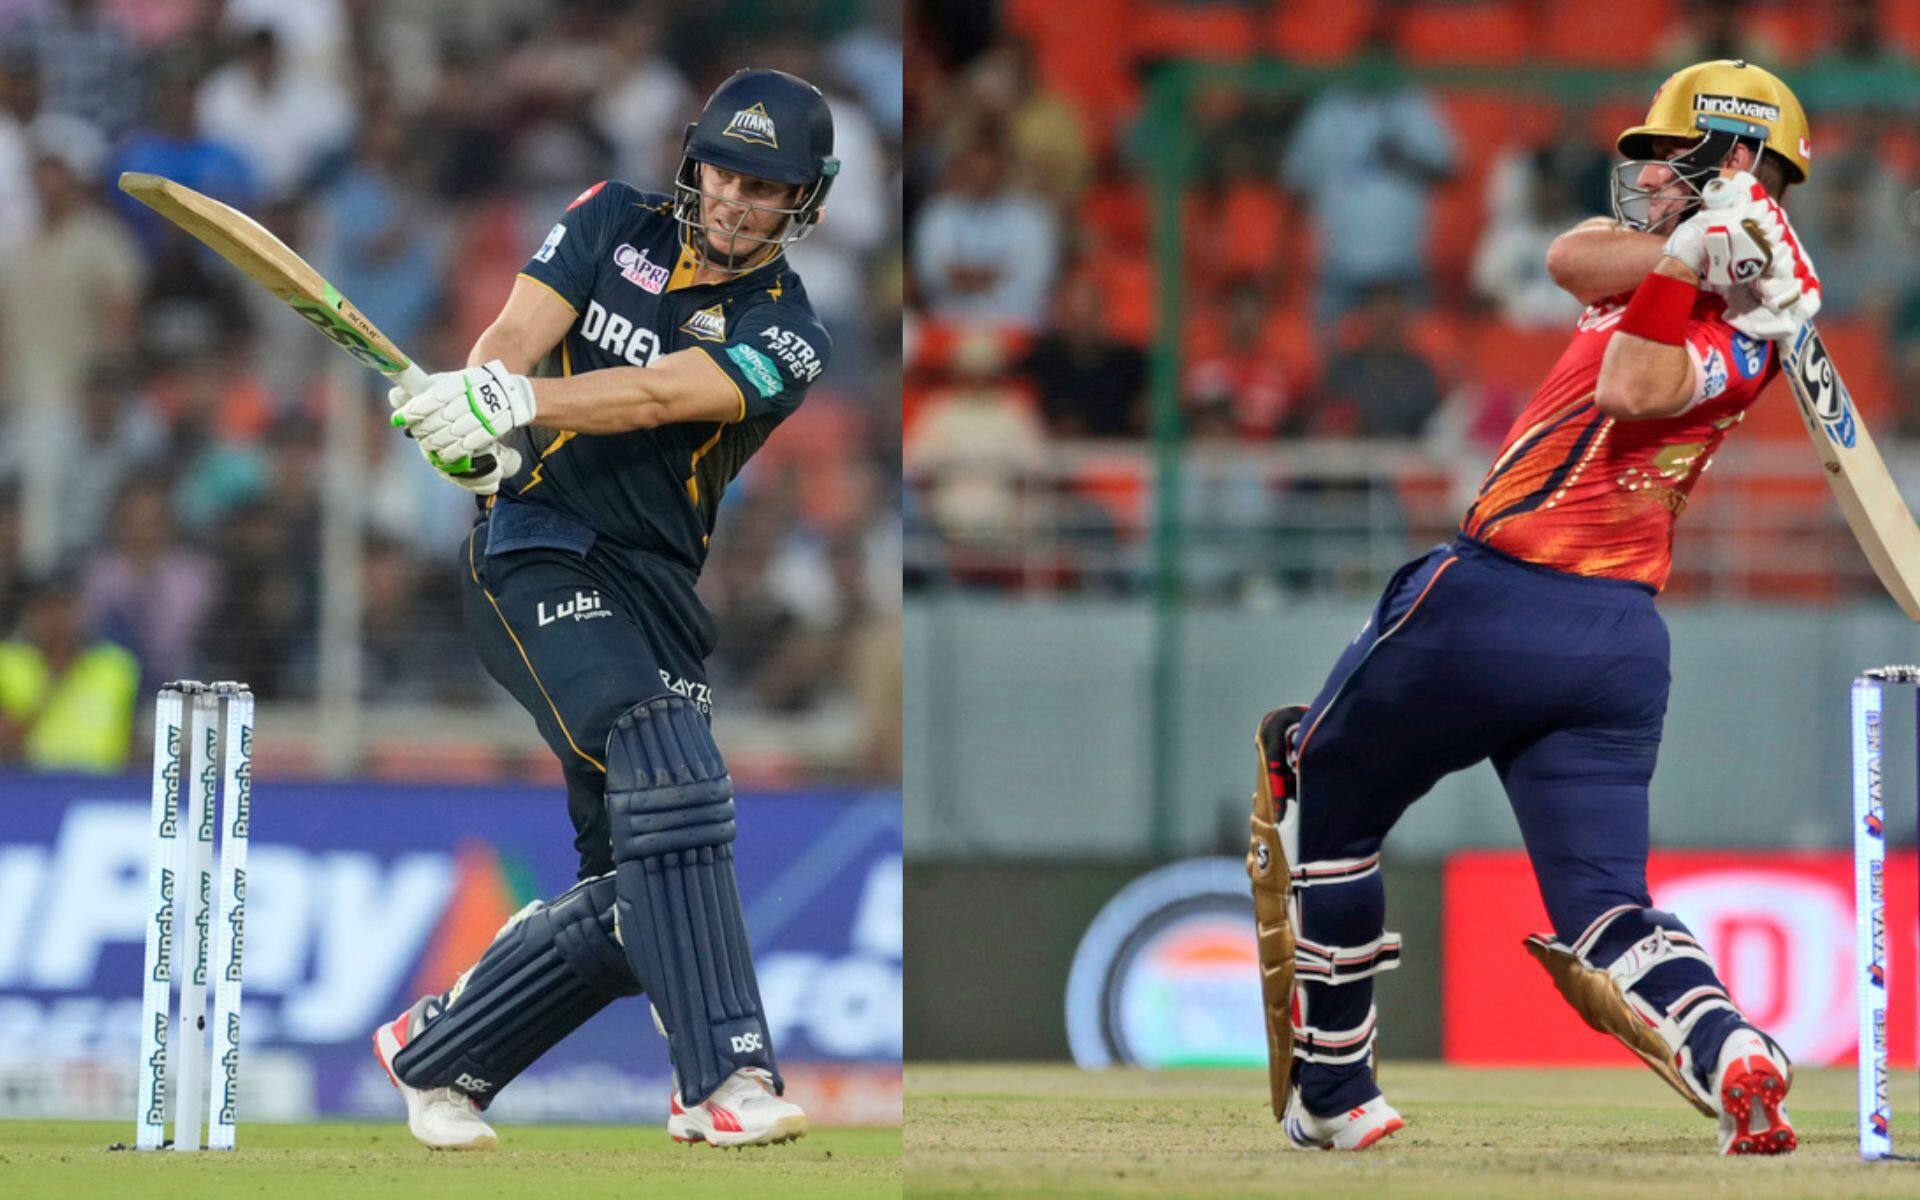 David Miller and Liam Livingstone will be important for their team's chances in the match [iplt20.com]